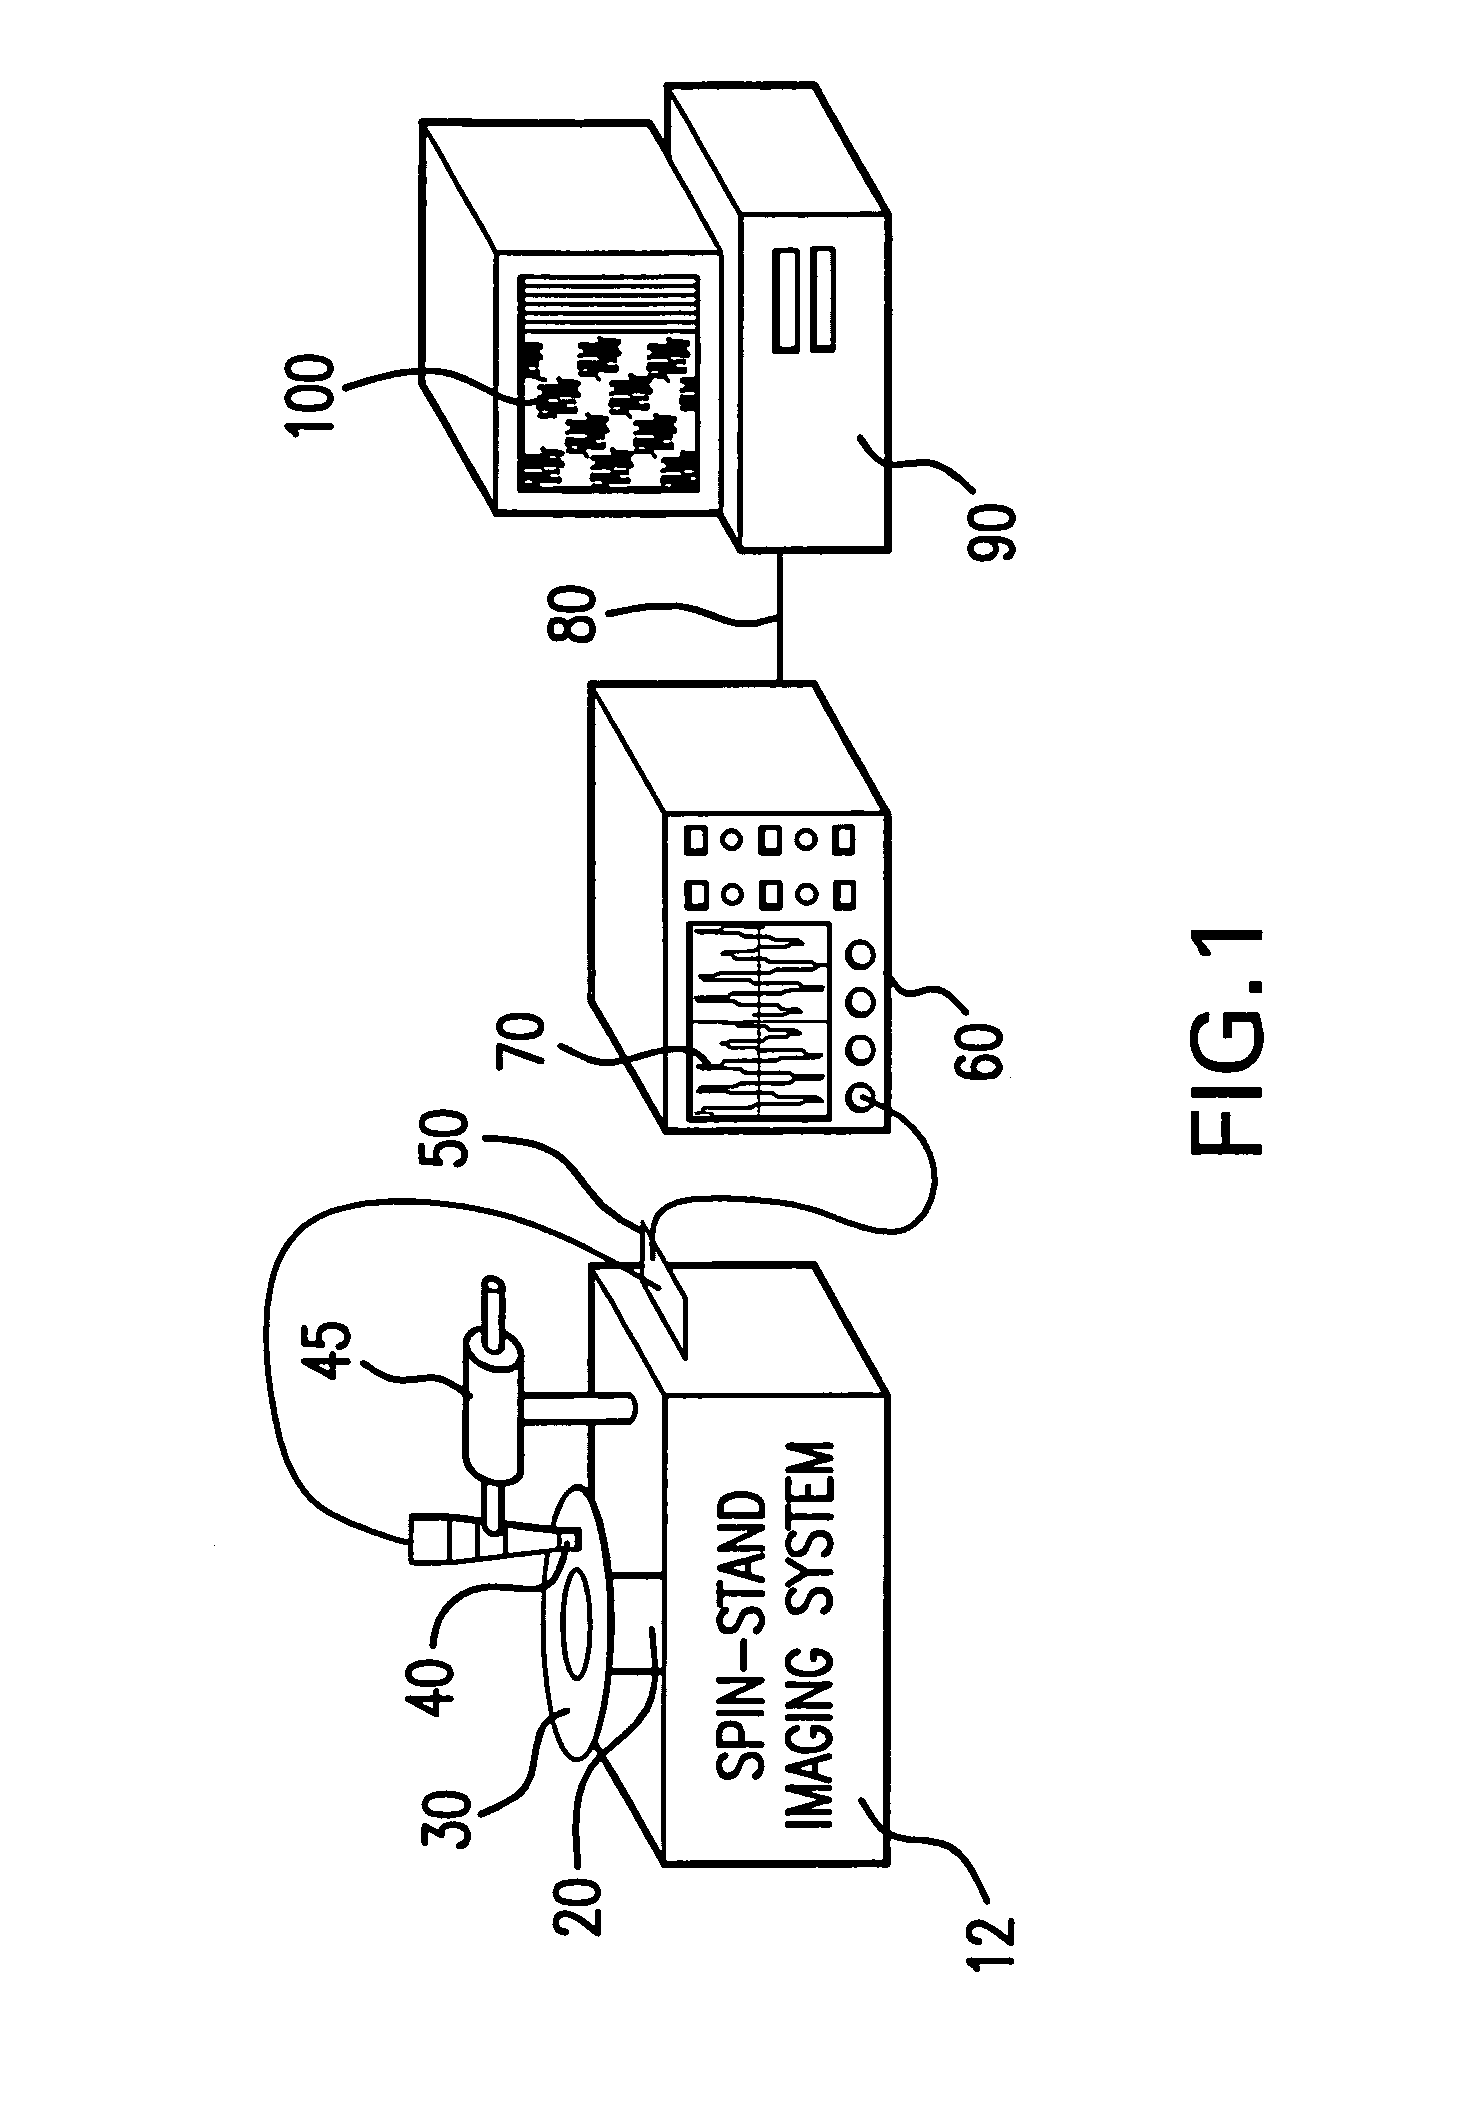 Method for intersymbol interference removal in data recovery